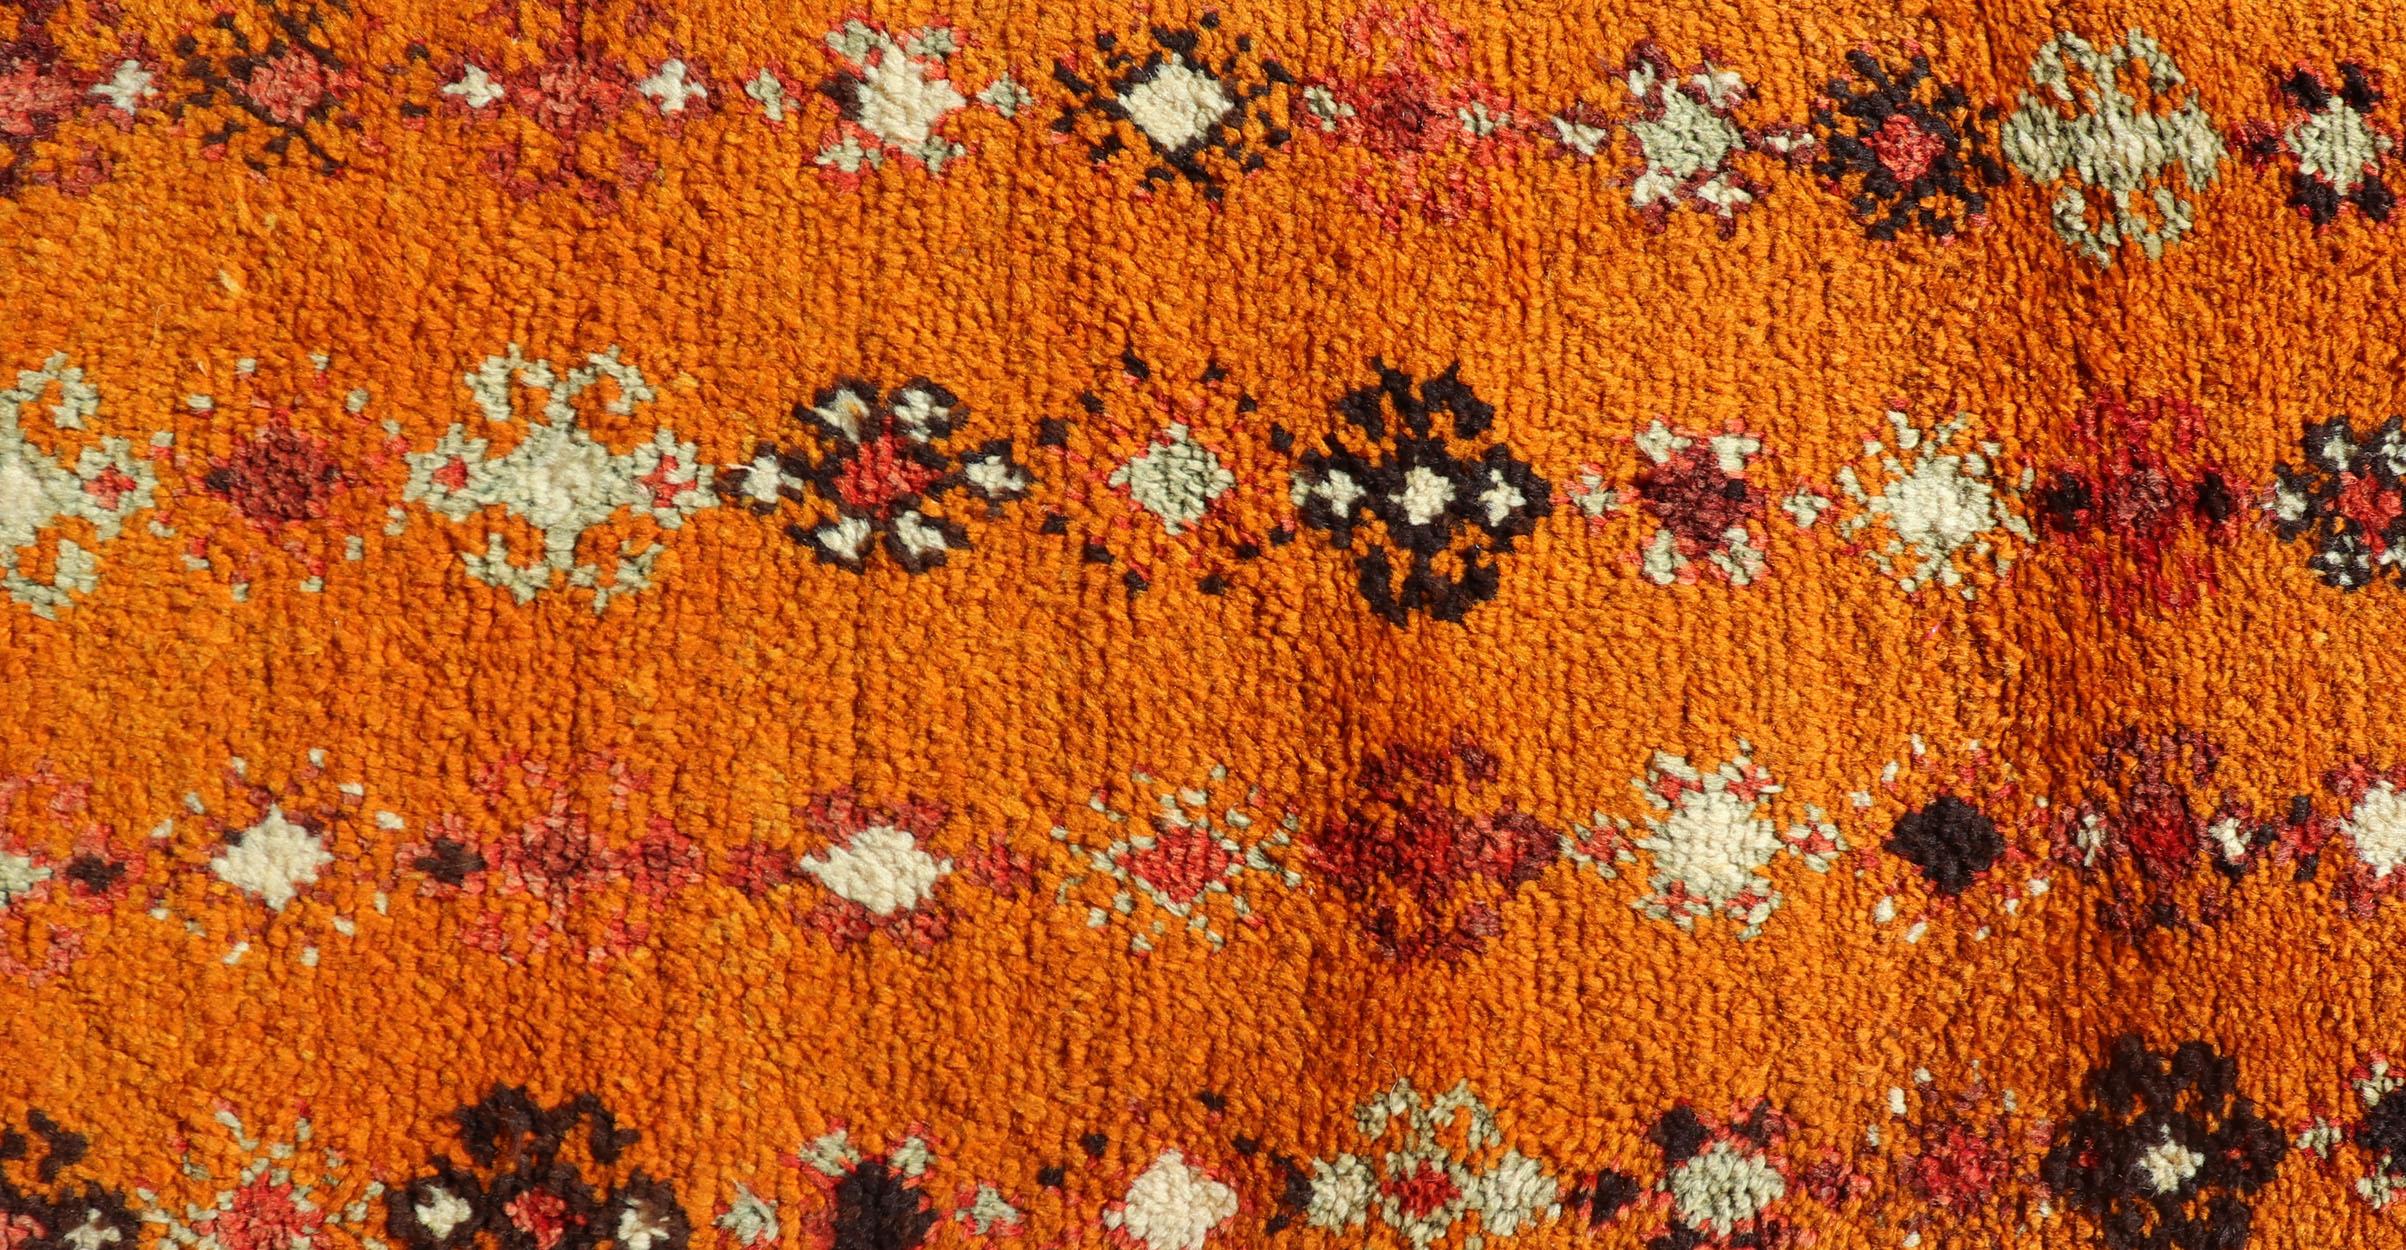 This lovely Vintage Moroccan carpet (circa 1940s), features an all-over sub-geometric design rendered in Saffron, Ivory, Brown and variations of Red, Green, Gold & Orange. These unique combination of colors and motifs render this rug into a